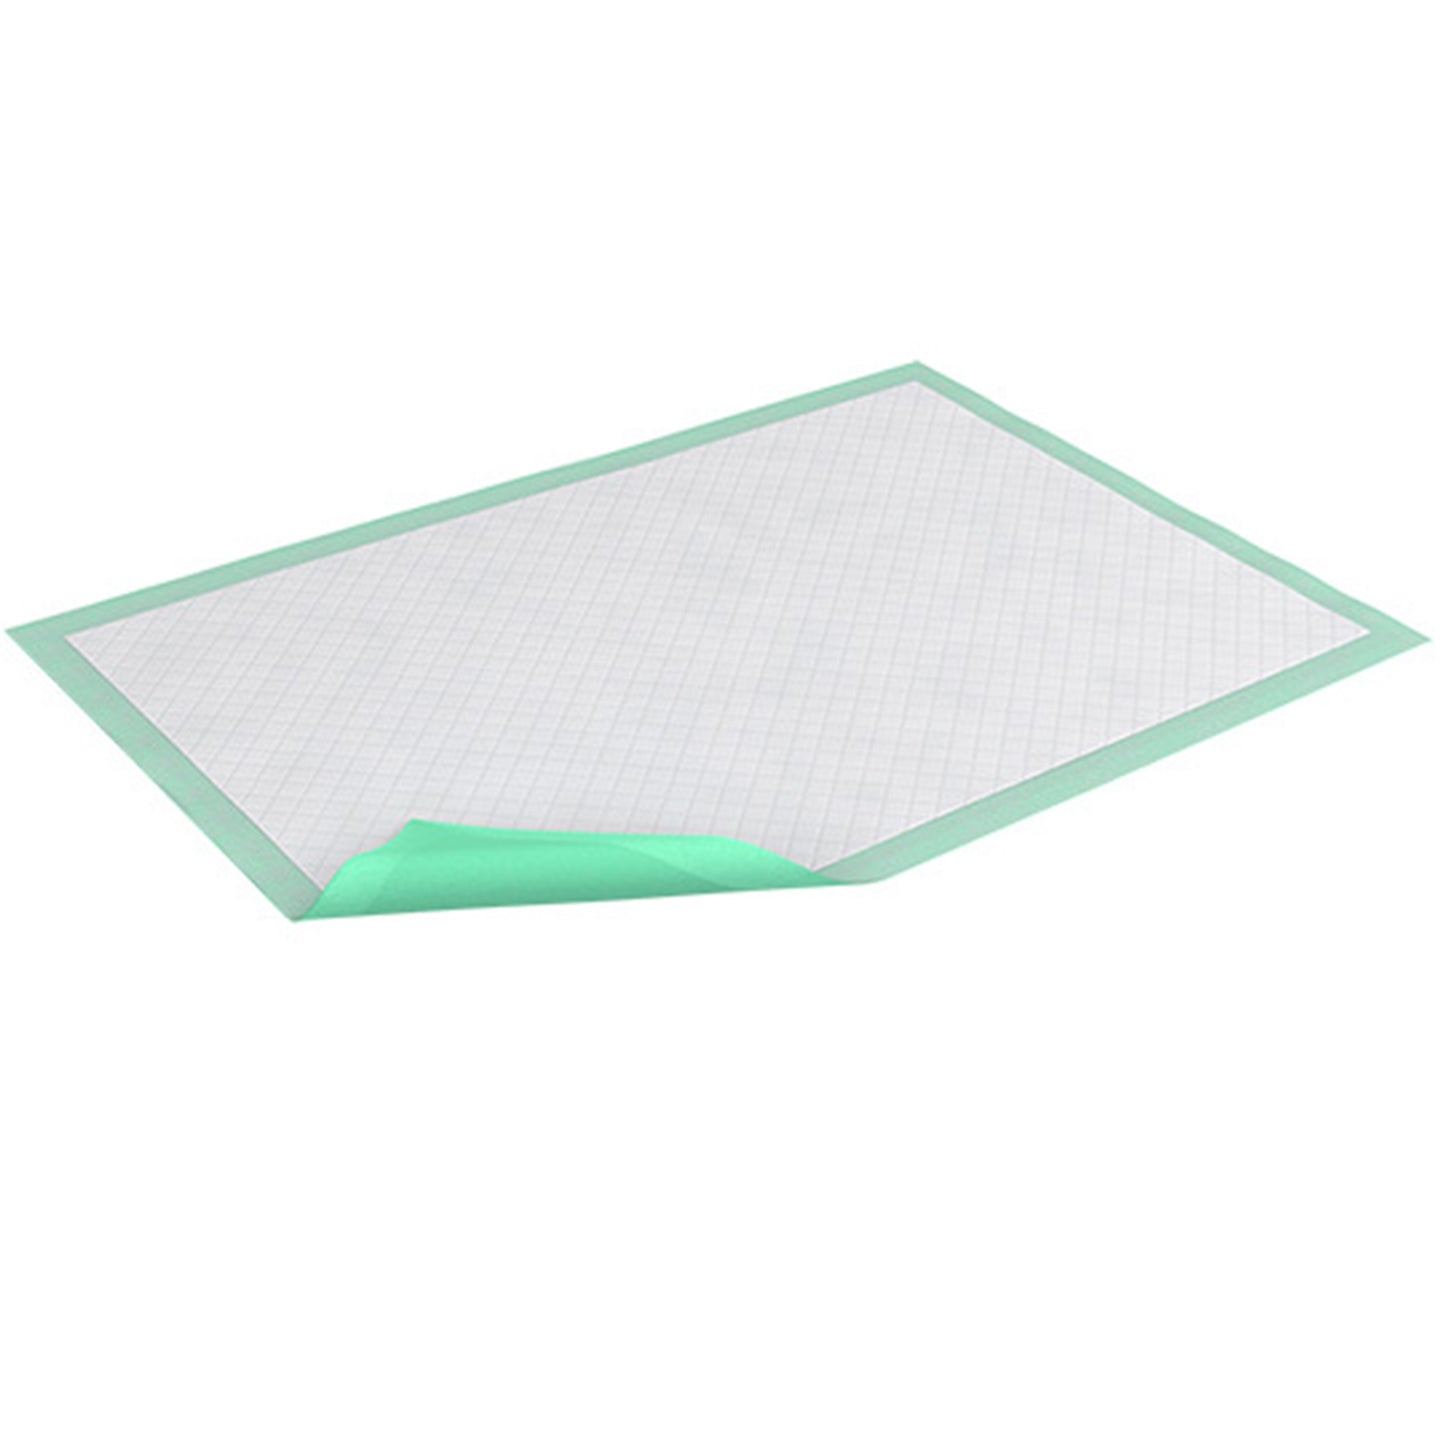 Tena® Ultra Plus Underpad, 28 X 36 In., Sold As 10/Pack Essity 61323